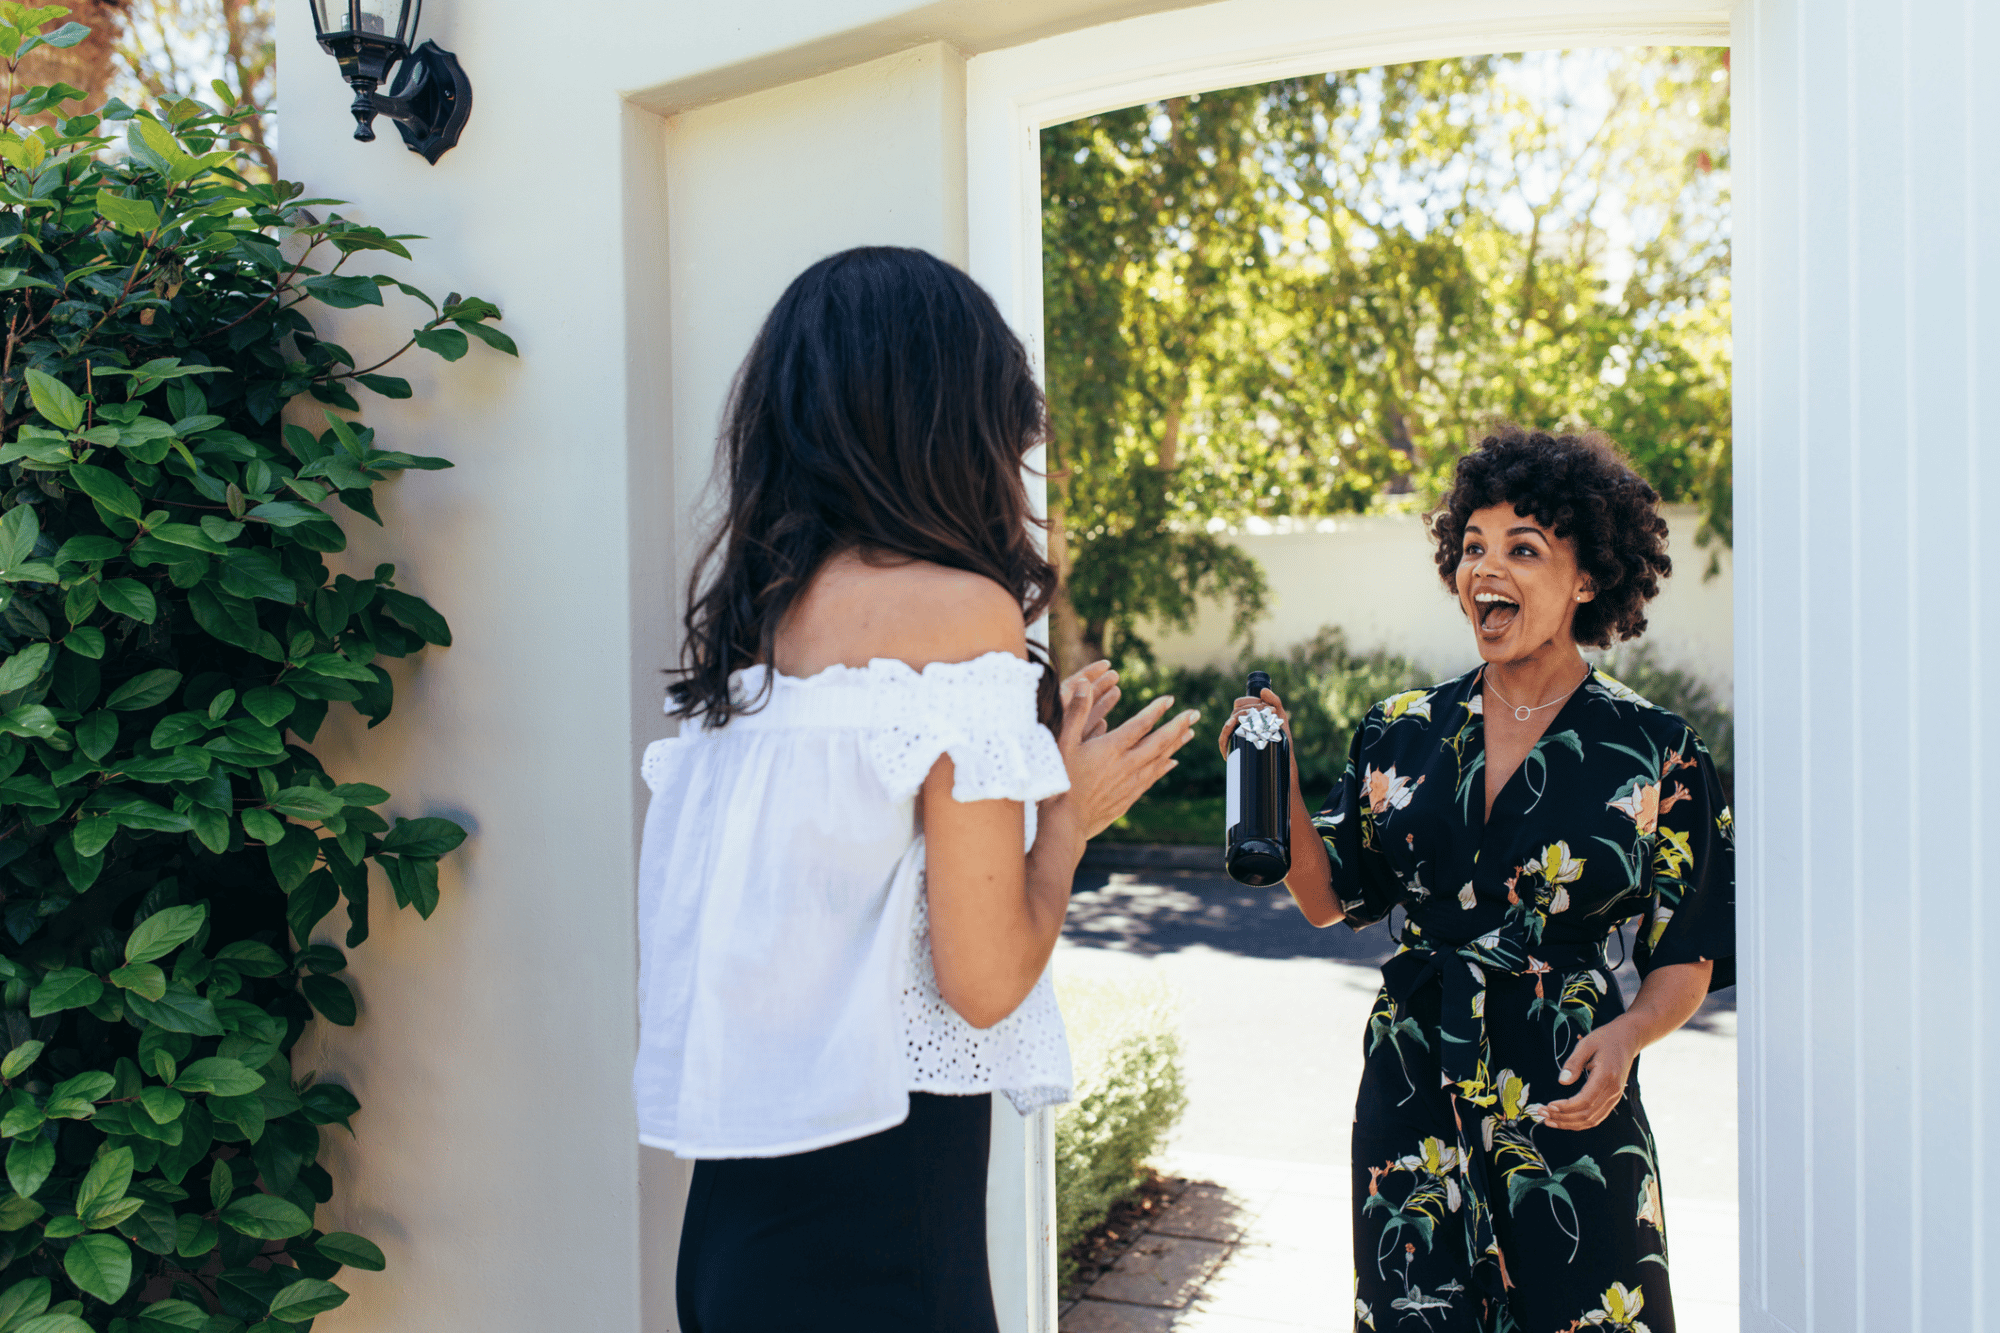 Photos of a real estate agent bringing the gift of a bottle of wine to her client as a closing gift at the front door of her client's new home